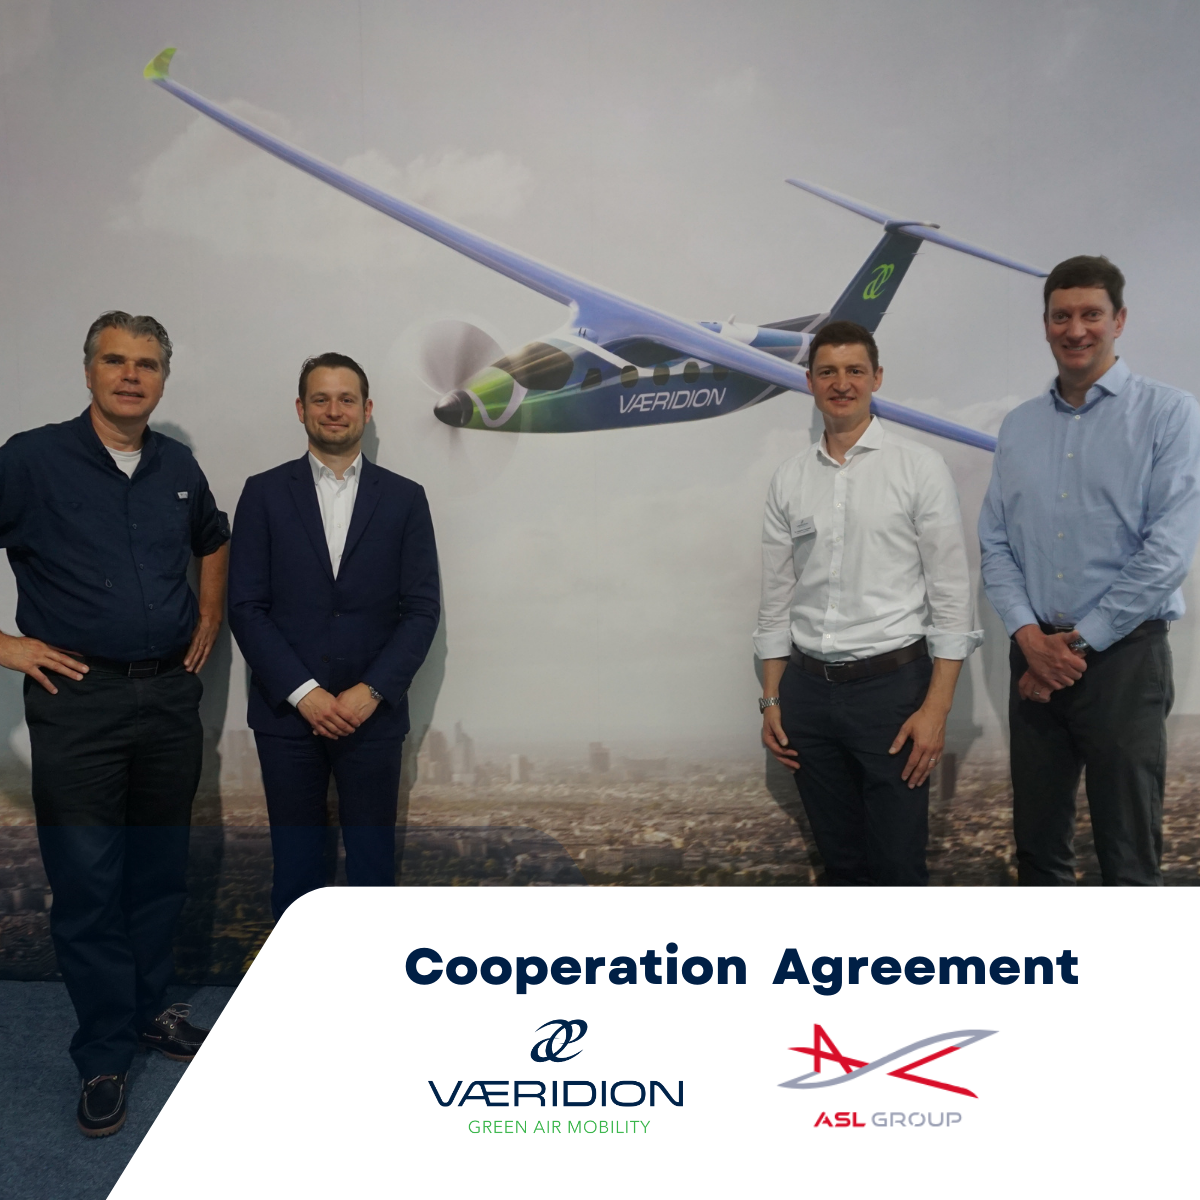 Cooperation Agreement with ASL Group to provide sustainable air mobility for the business aviation sector